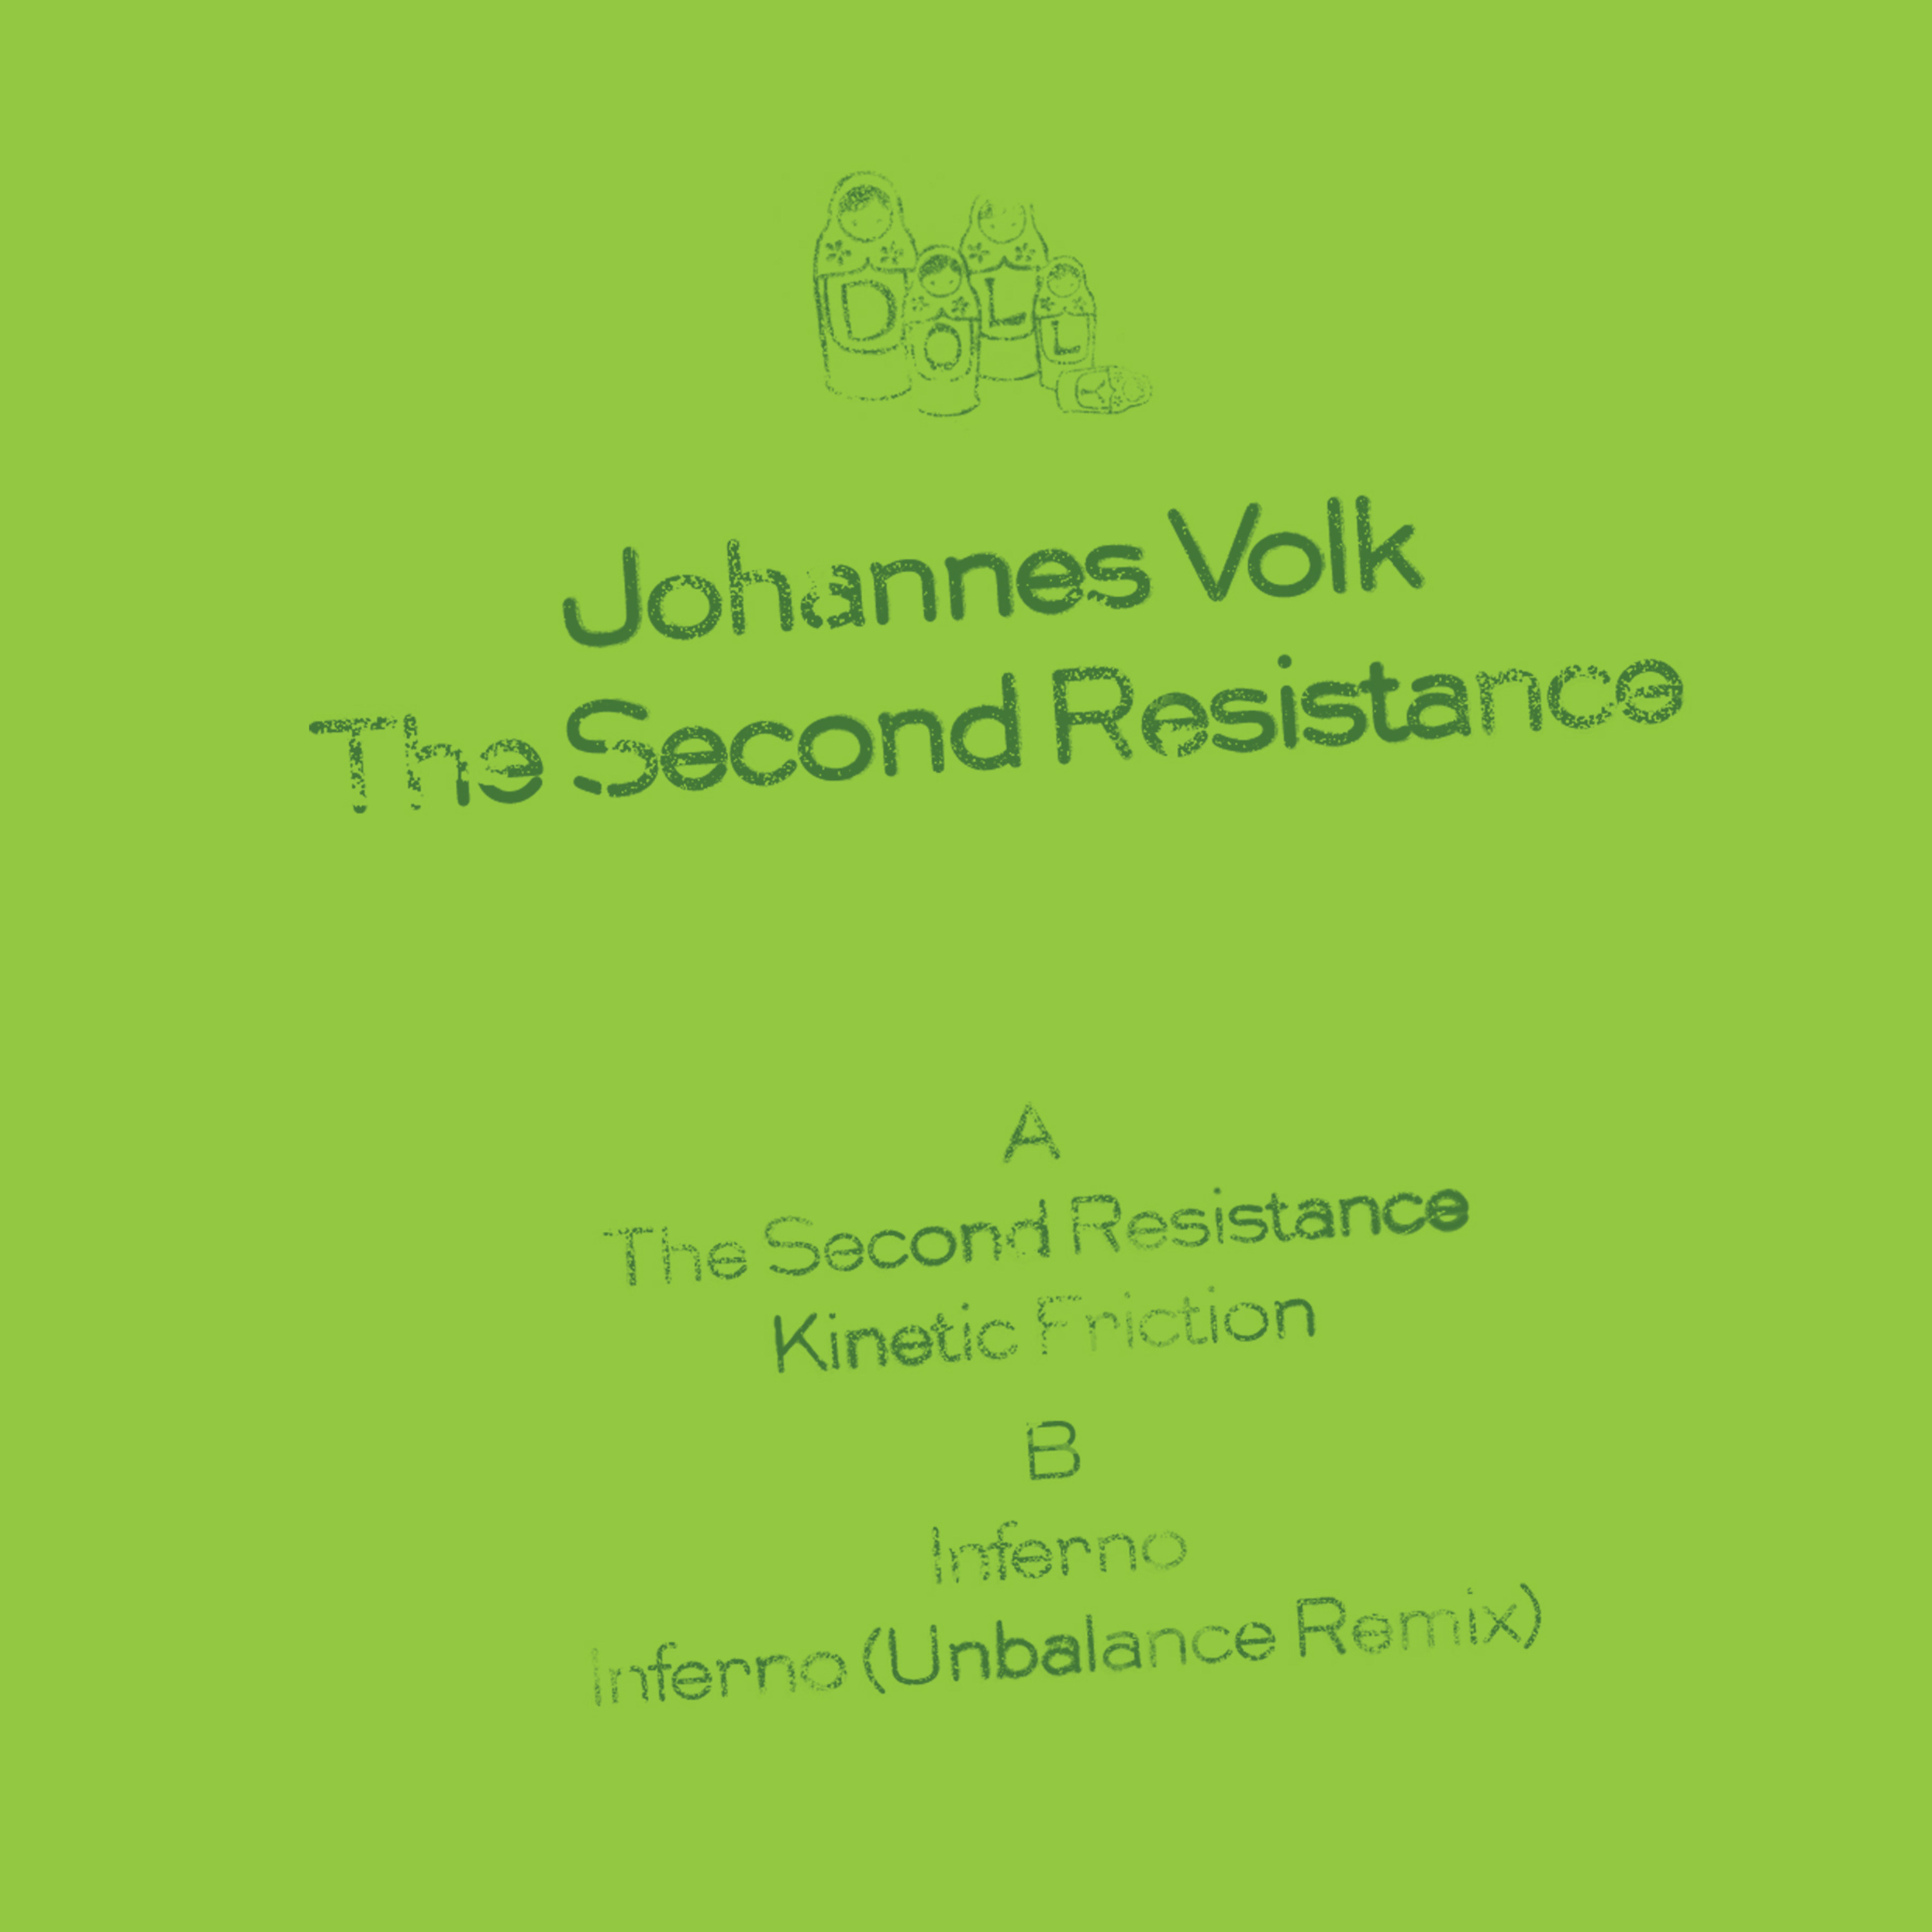 The Second Resistance